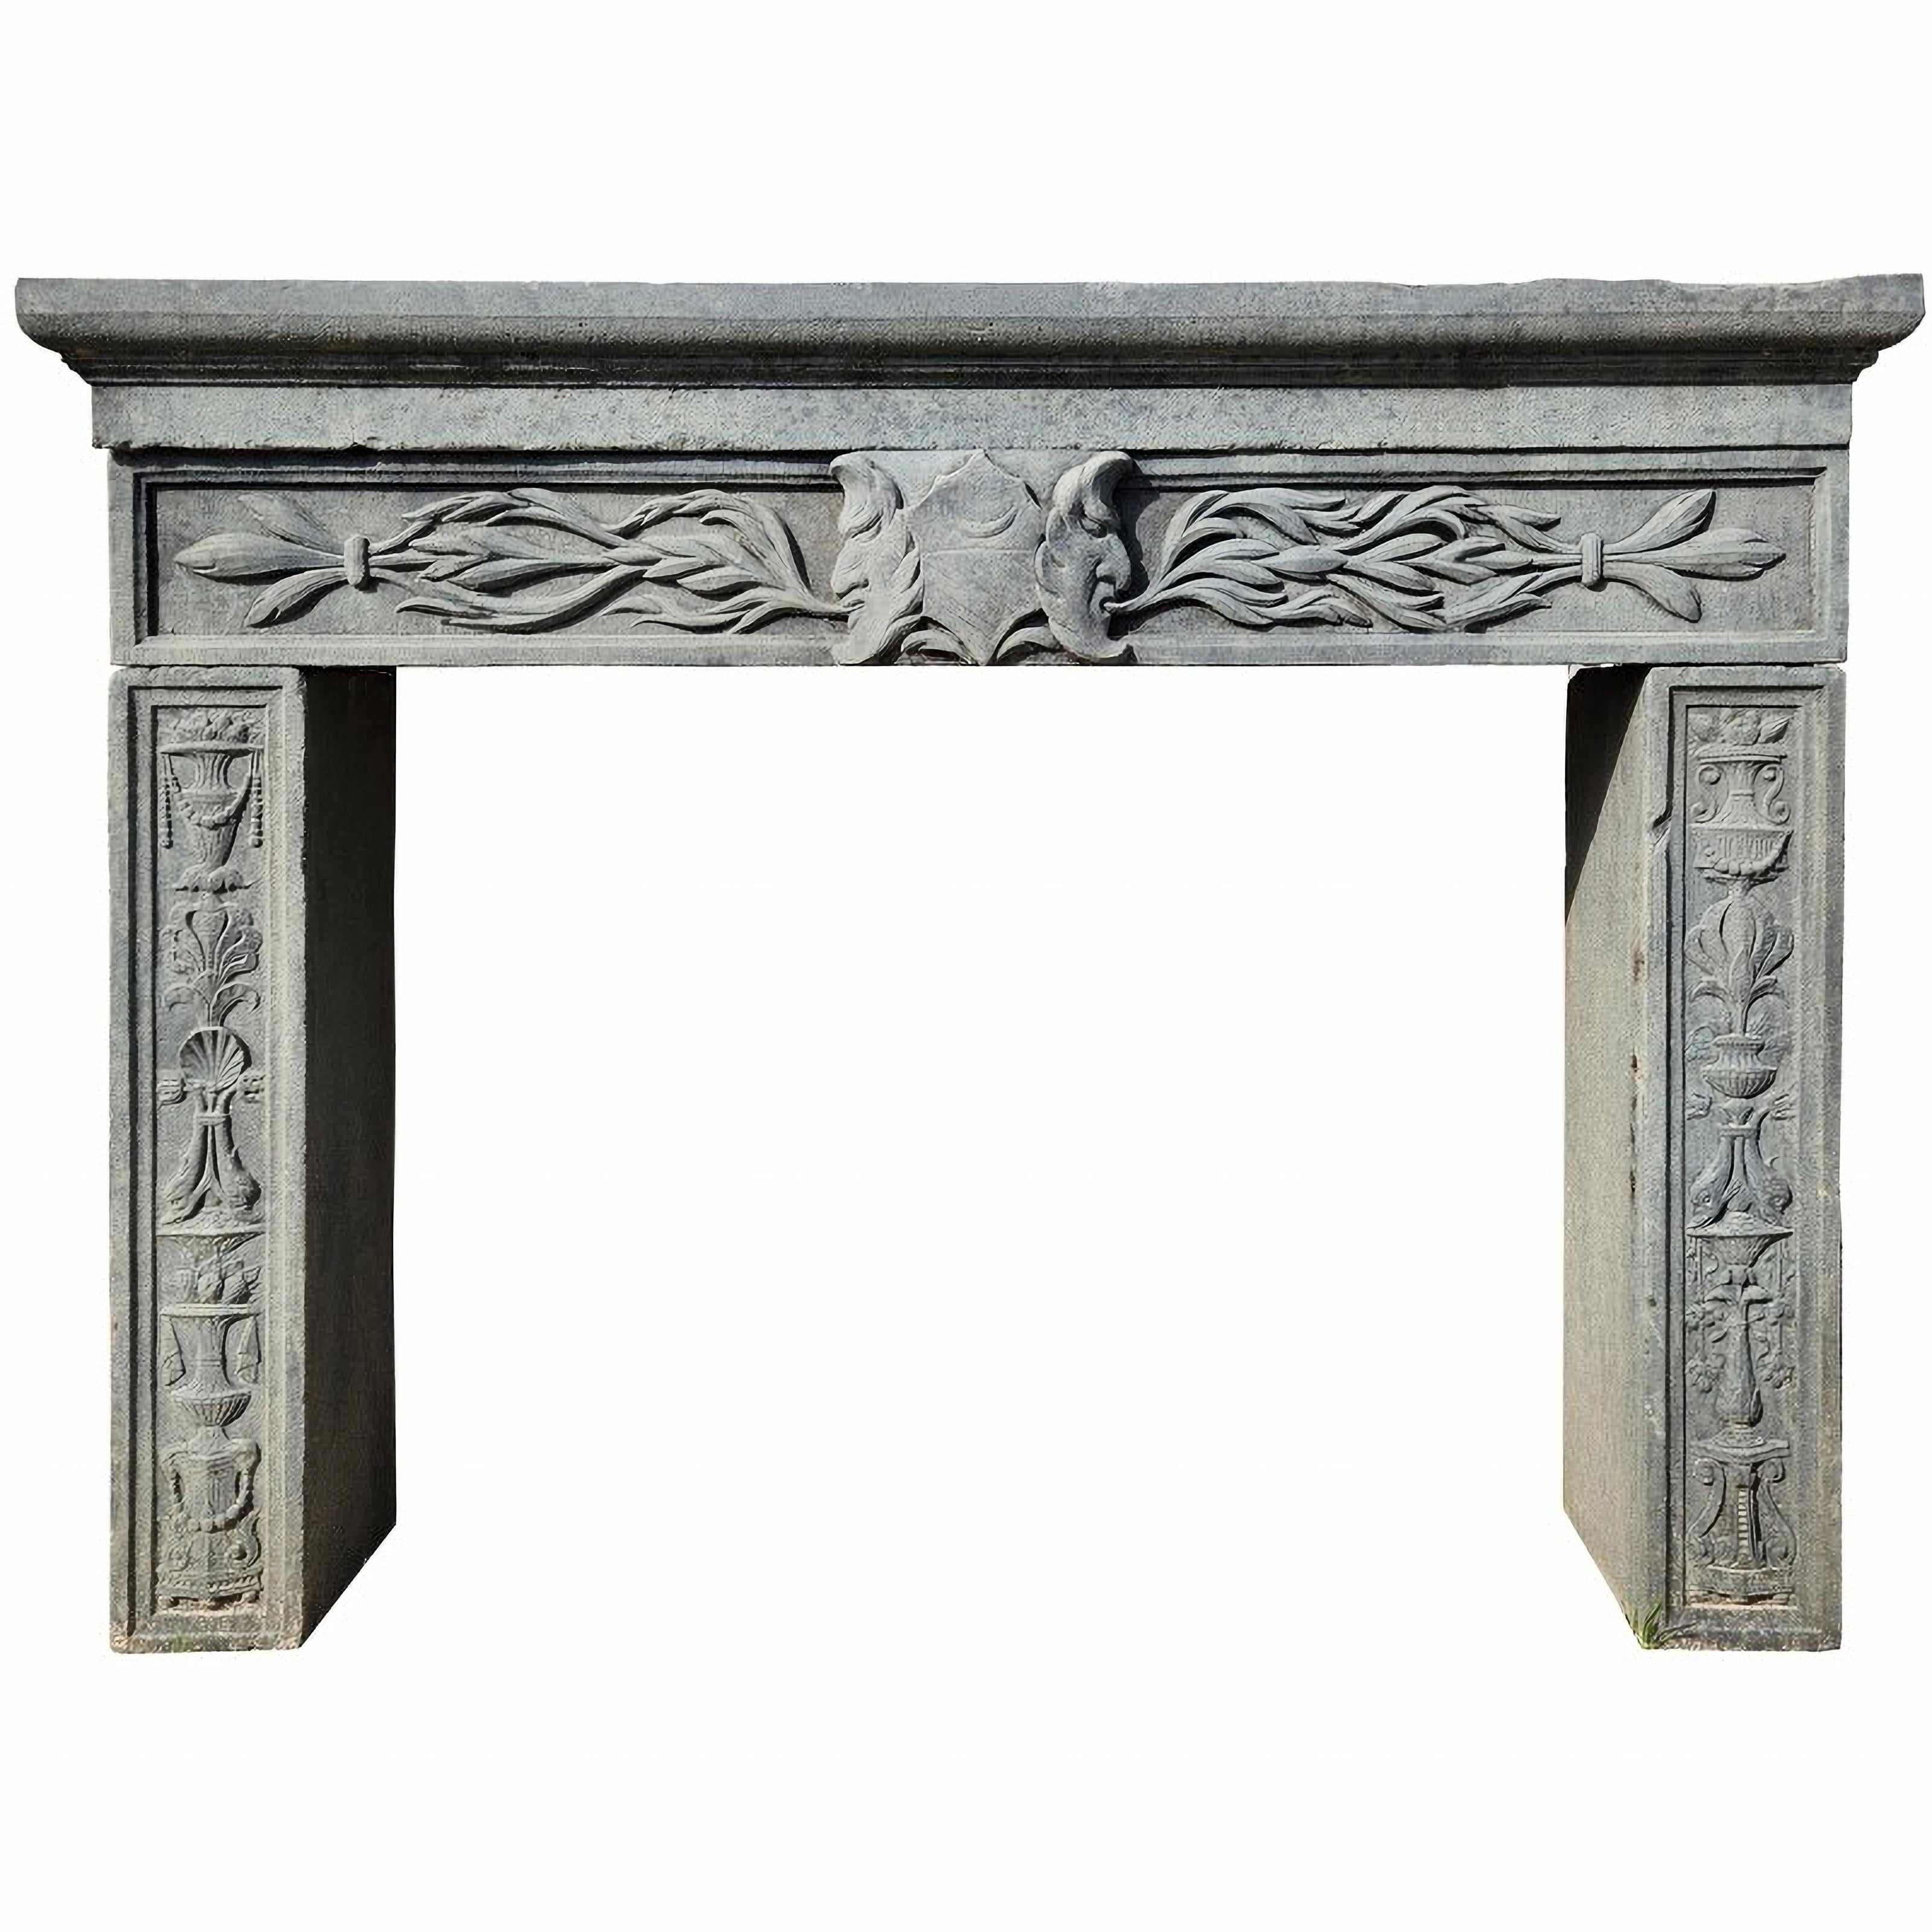 ANTIQUE TUSCAN PIETRA SERENA FIREPLACE 20th Century In Good Condition For Sale In Madrid, ES